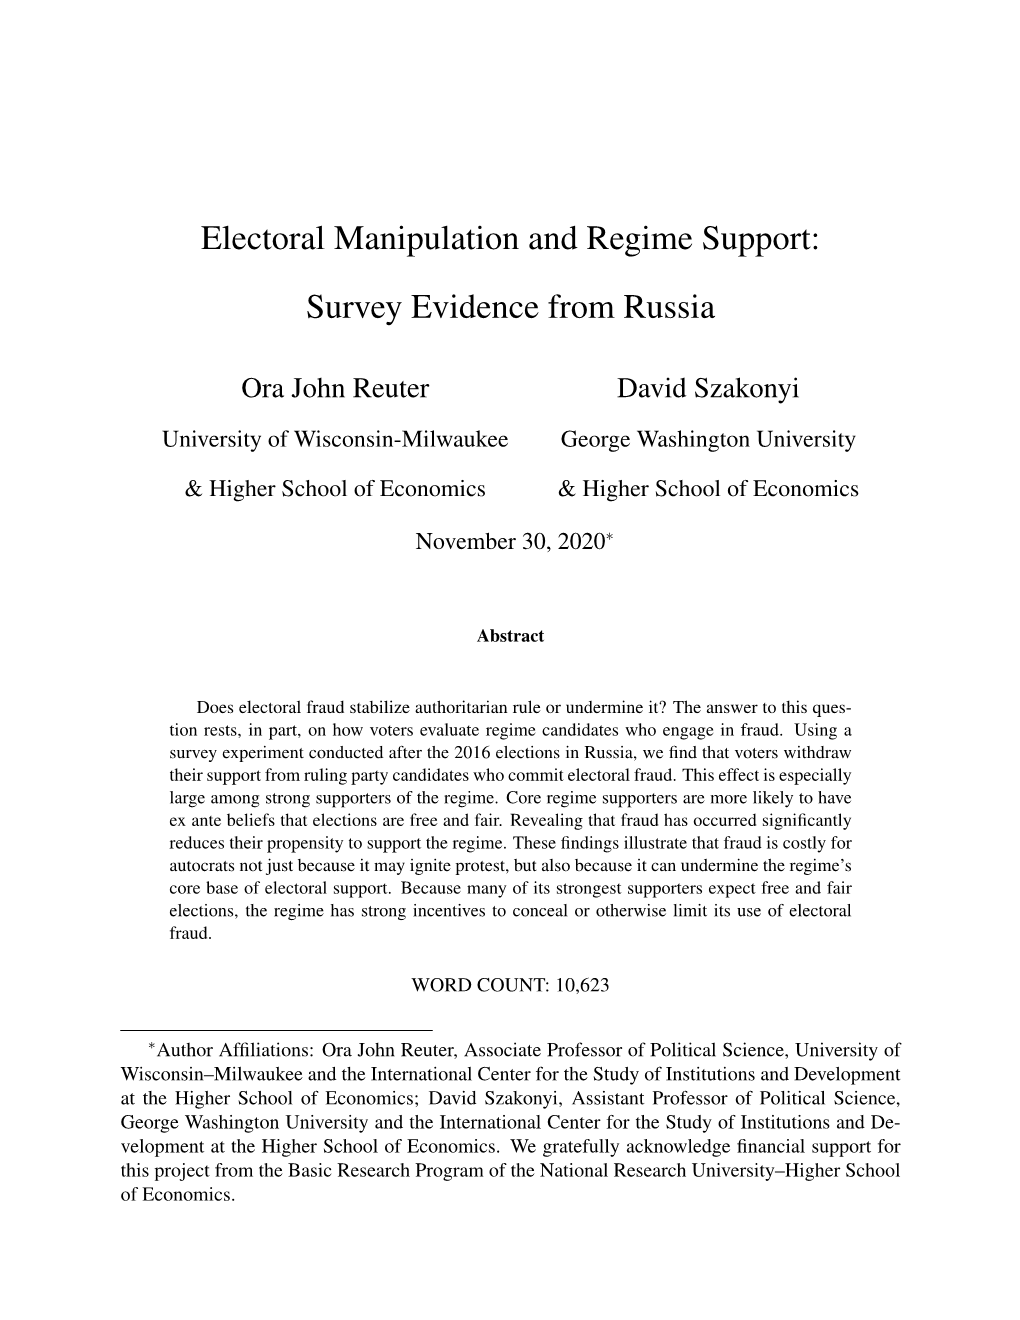 Electoral Manipulation and Regime Support: Survey Evidence from Russia